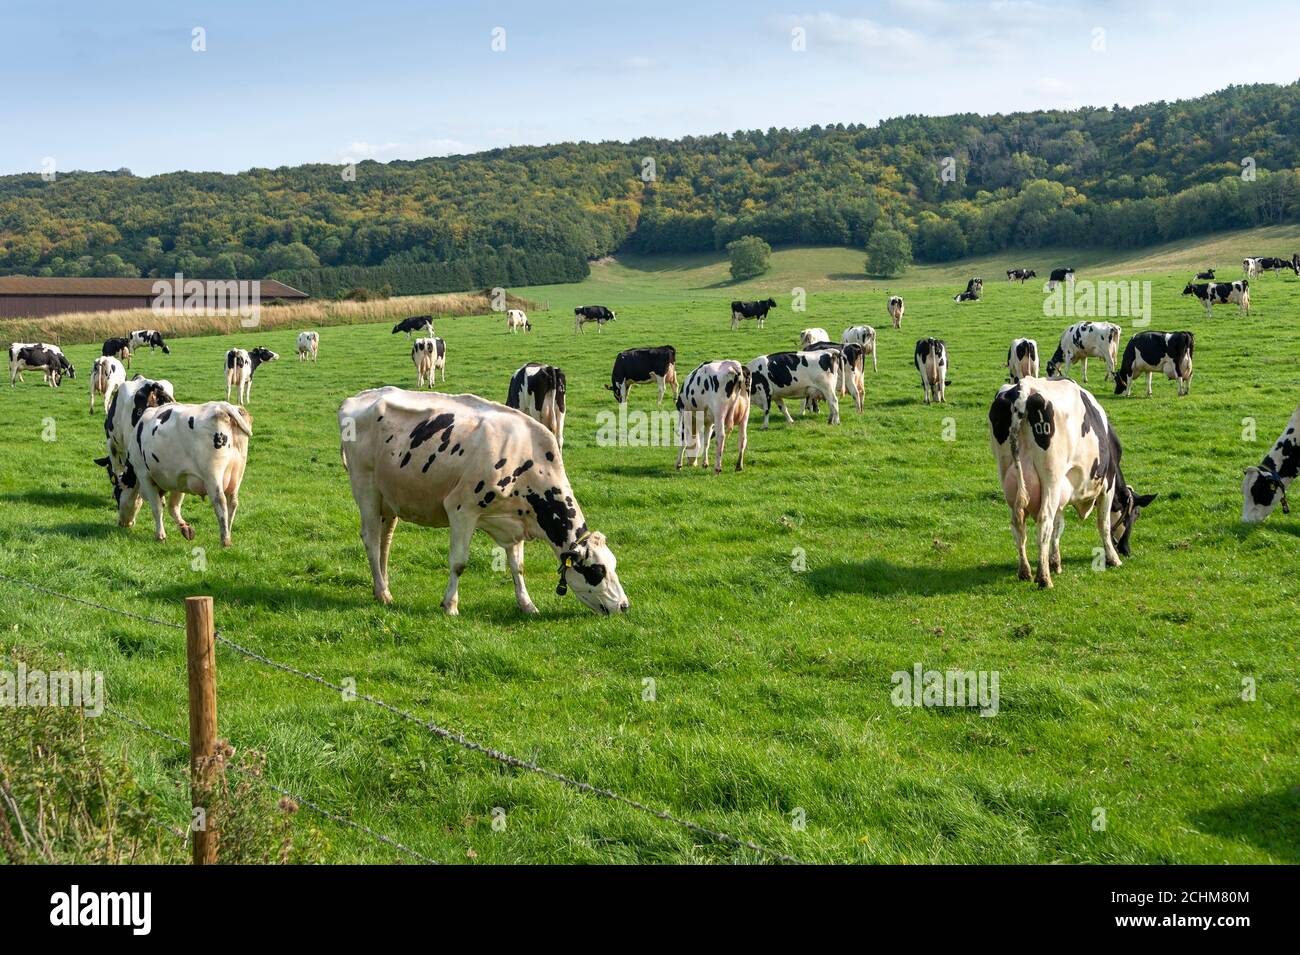 Cows grazing in a field, eating grass. Stock Photo